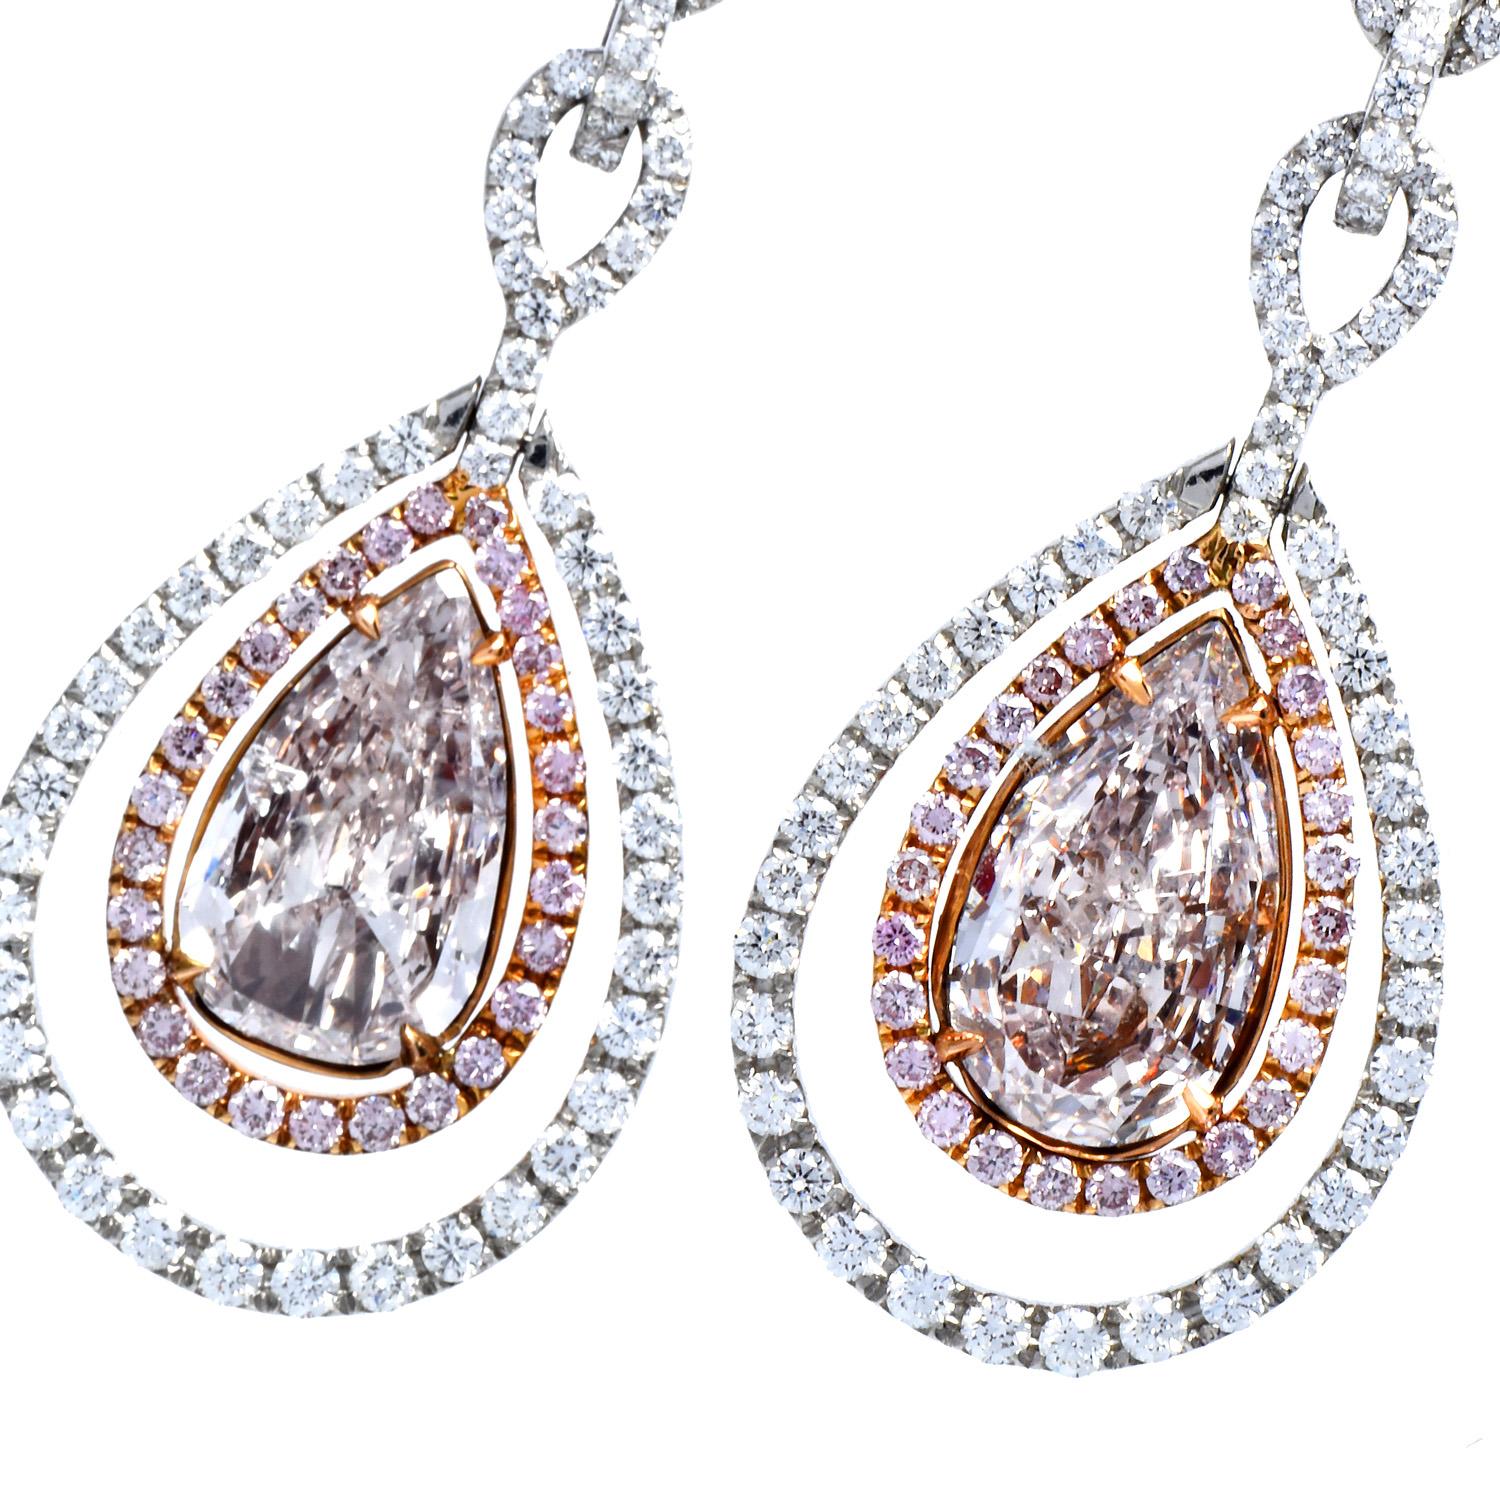 These shimmering GIA Natural Fancy Light Pink Diamond Platinum Gold Dangle Earrings are crafted in solid 18K yellow gold and Platinum.

They display a pear-shaped dangle drop in the center with two genuine pear-cut Natural Fancy Light pink diamonds